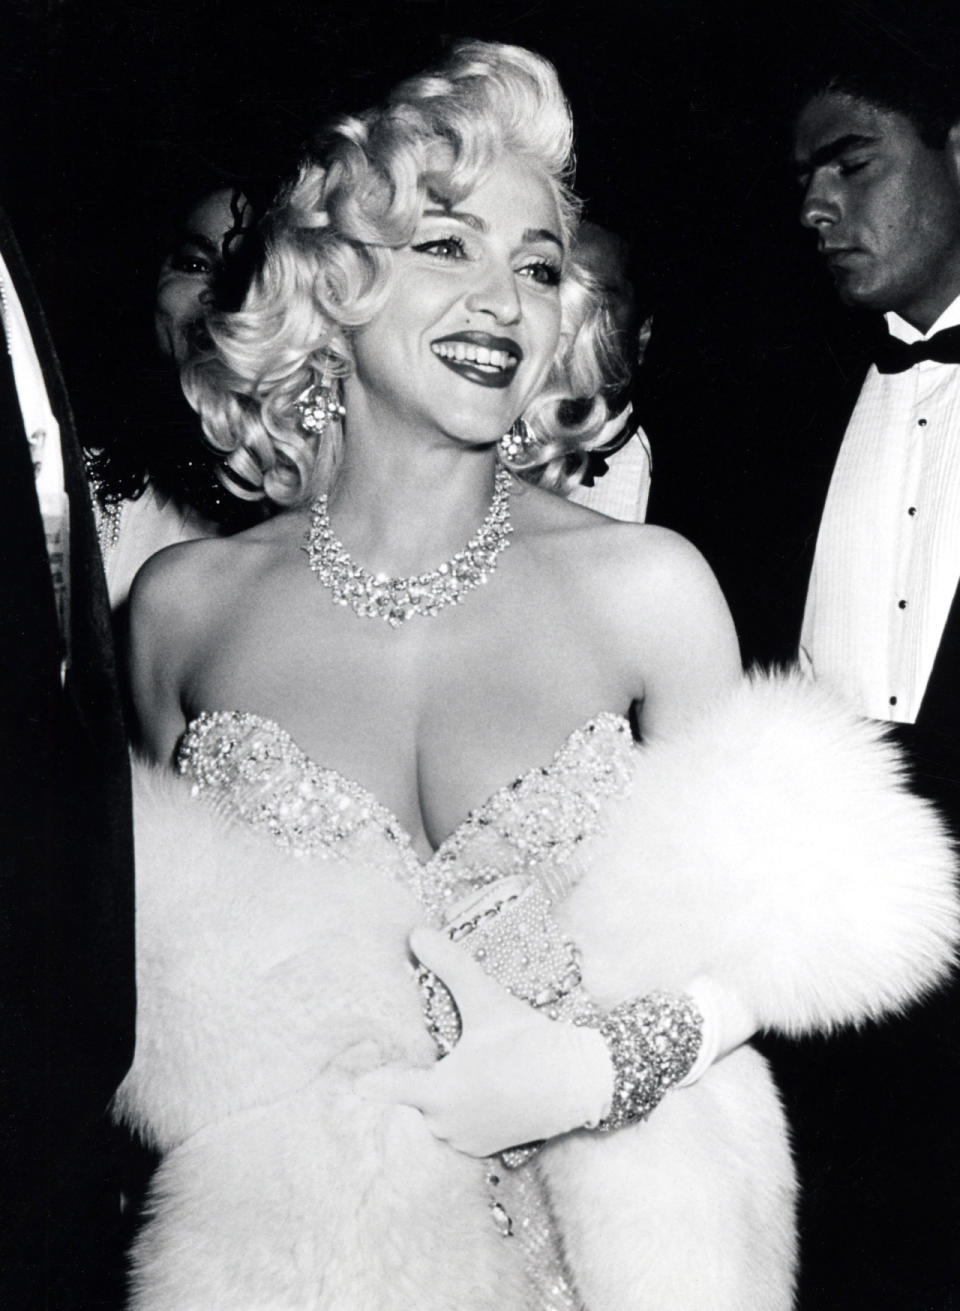 Earlier in her career, Madonna often returned to her old Hollywood blond bombshell look with platinum curls, red lips, and glistening jewels. Her “Material Girl” music video even paid tribute to Marilyn Monroe’s “Diamonds are a Girl’s Best Friend.”